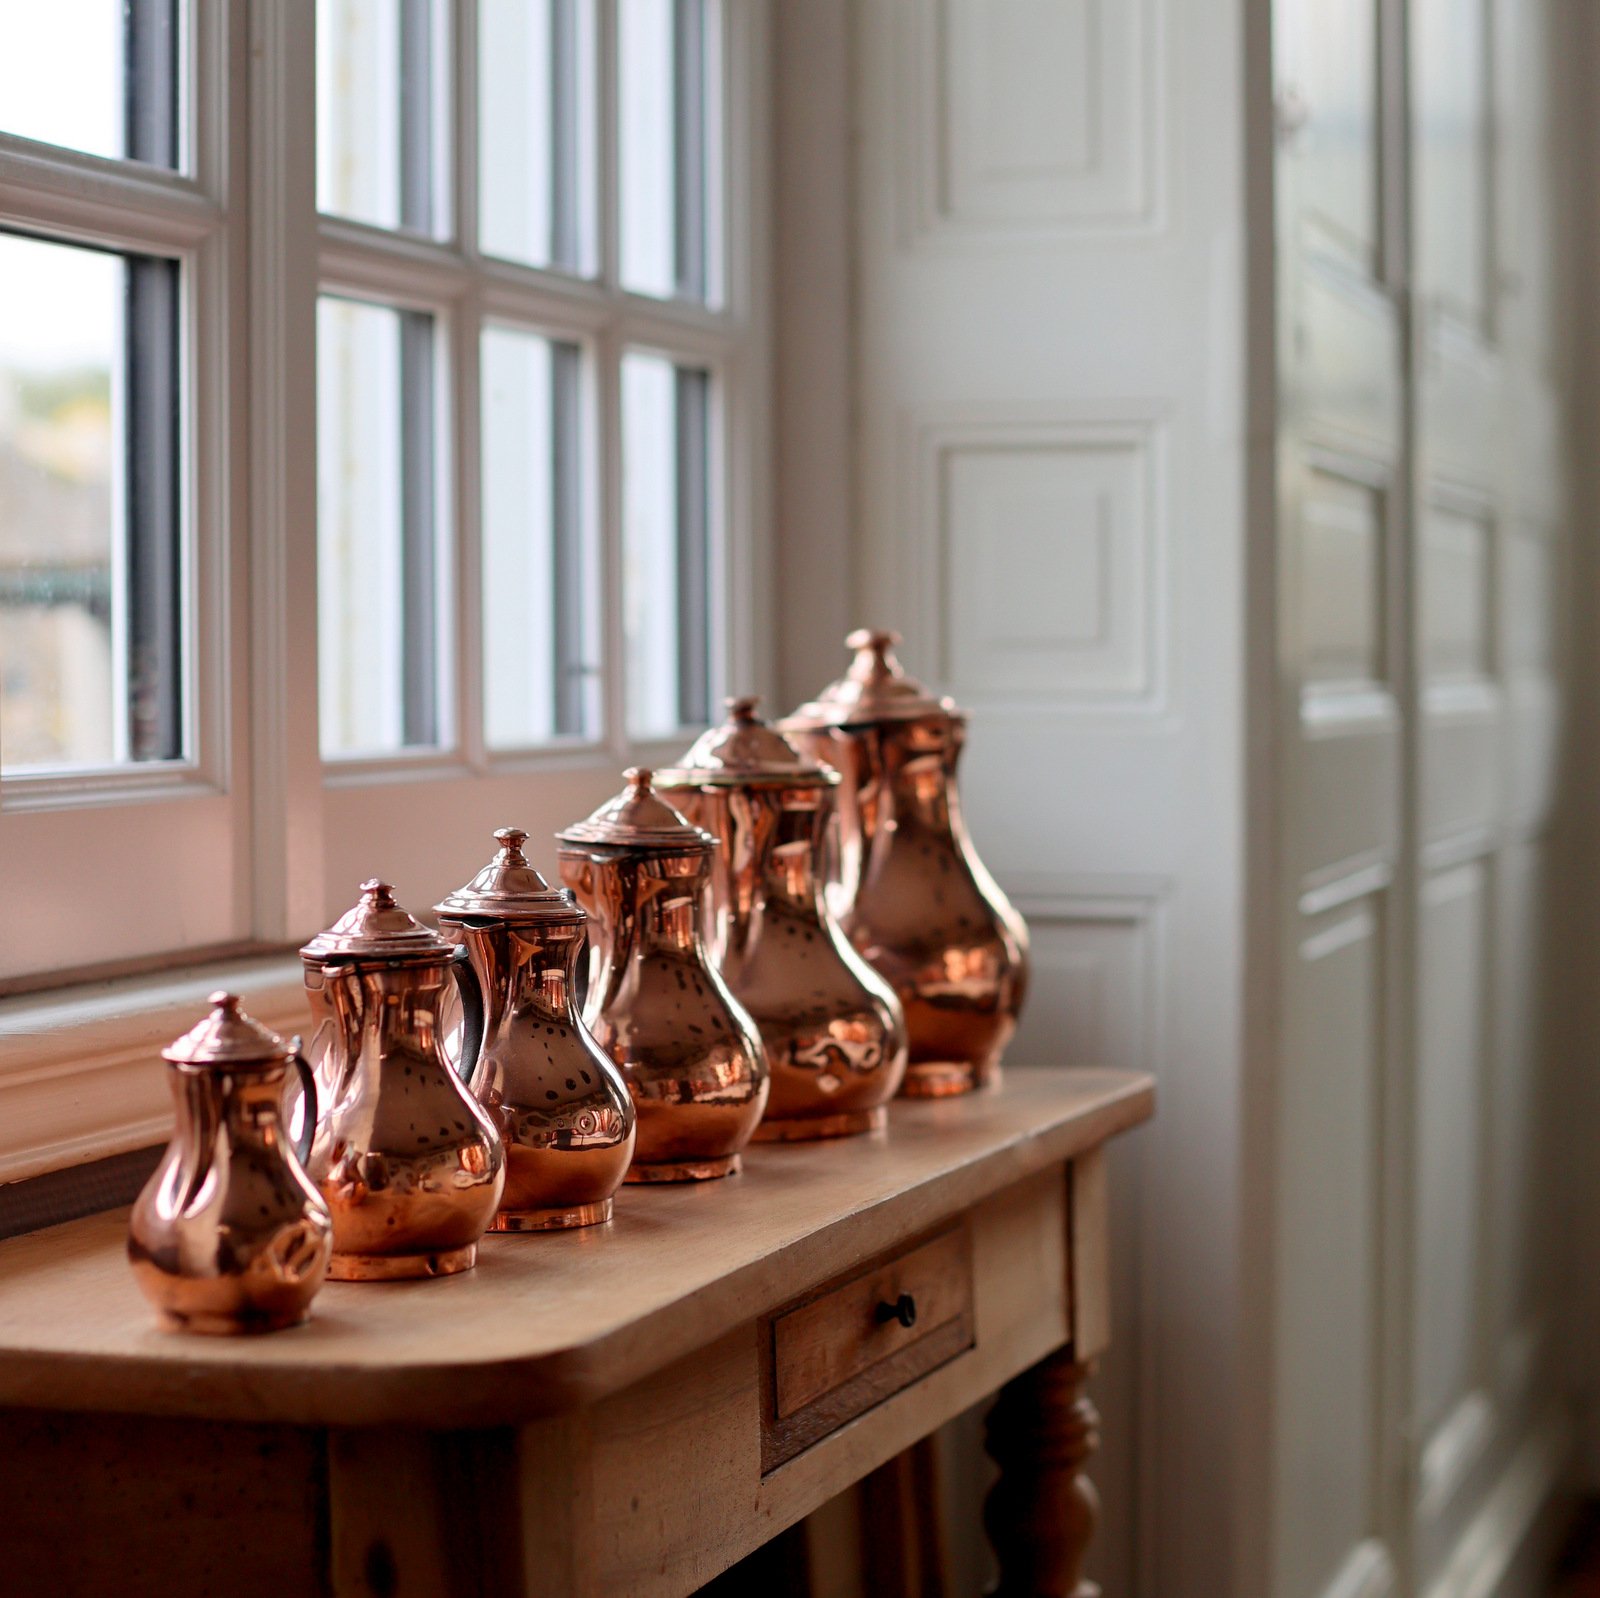 Copper Cookware from France – The Guide - Brocante Ma Jolie